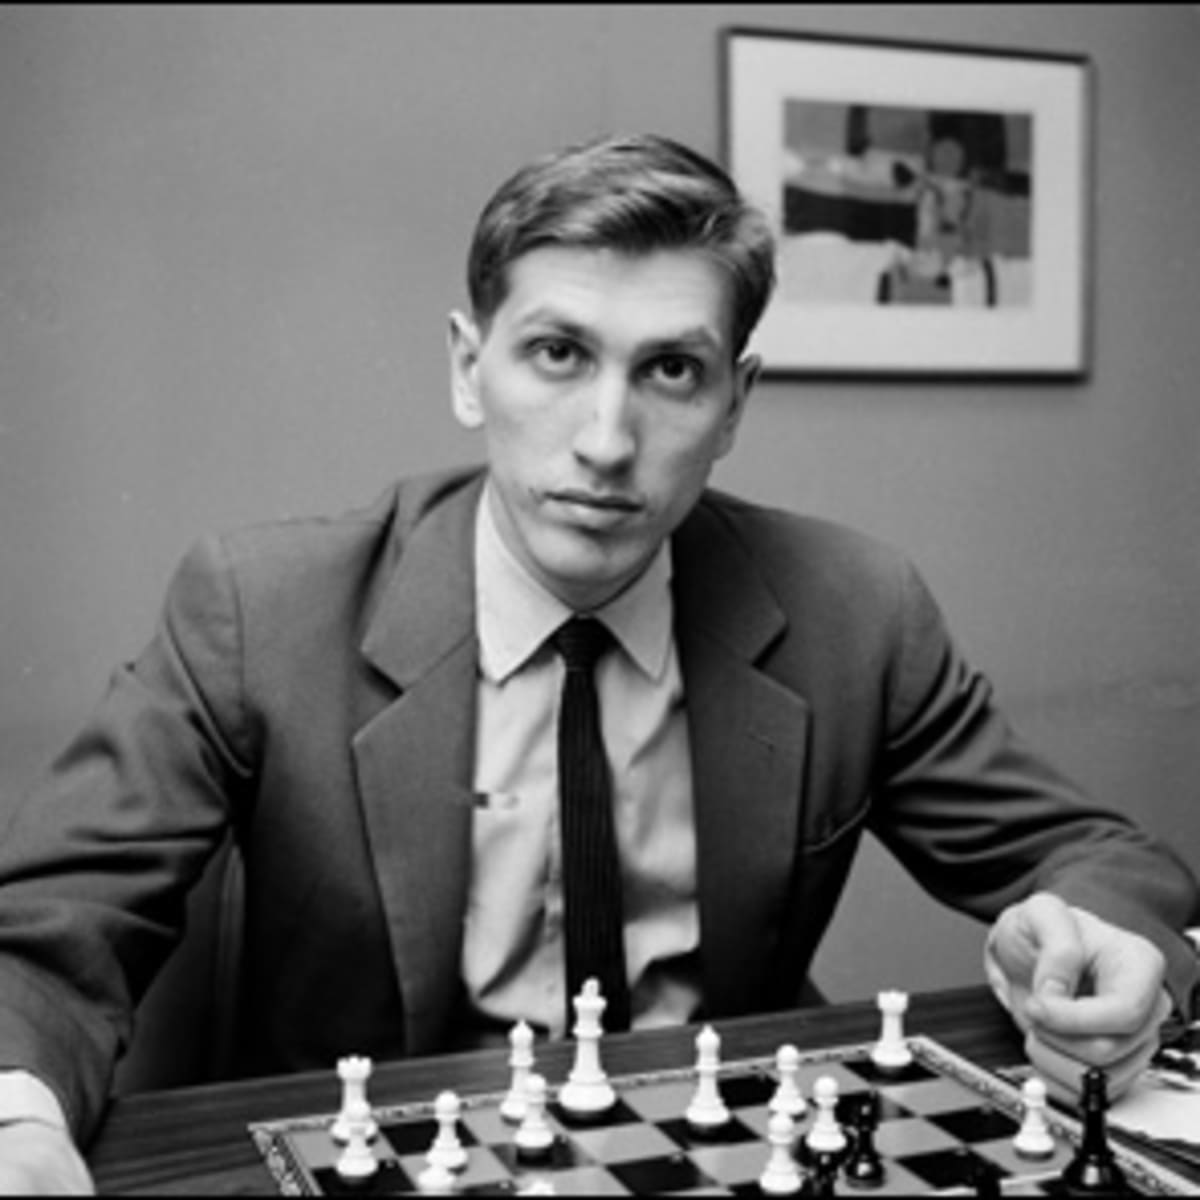 Bobby Fischer® Learn to Play Chess – Winner of the Mom's Choice